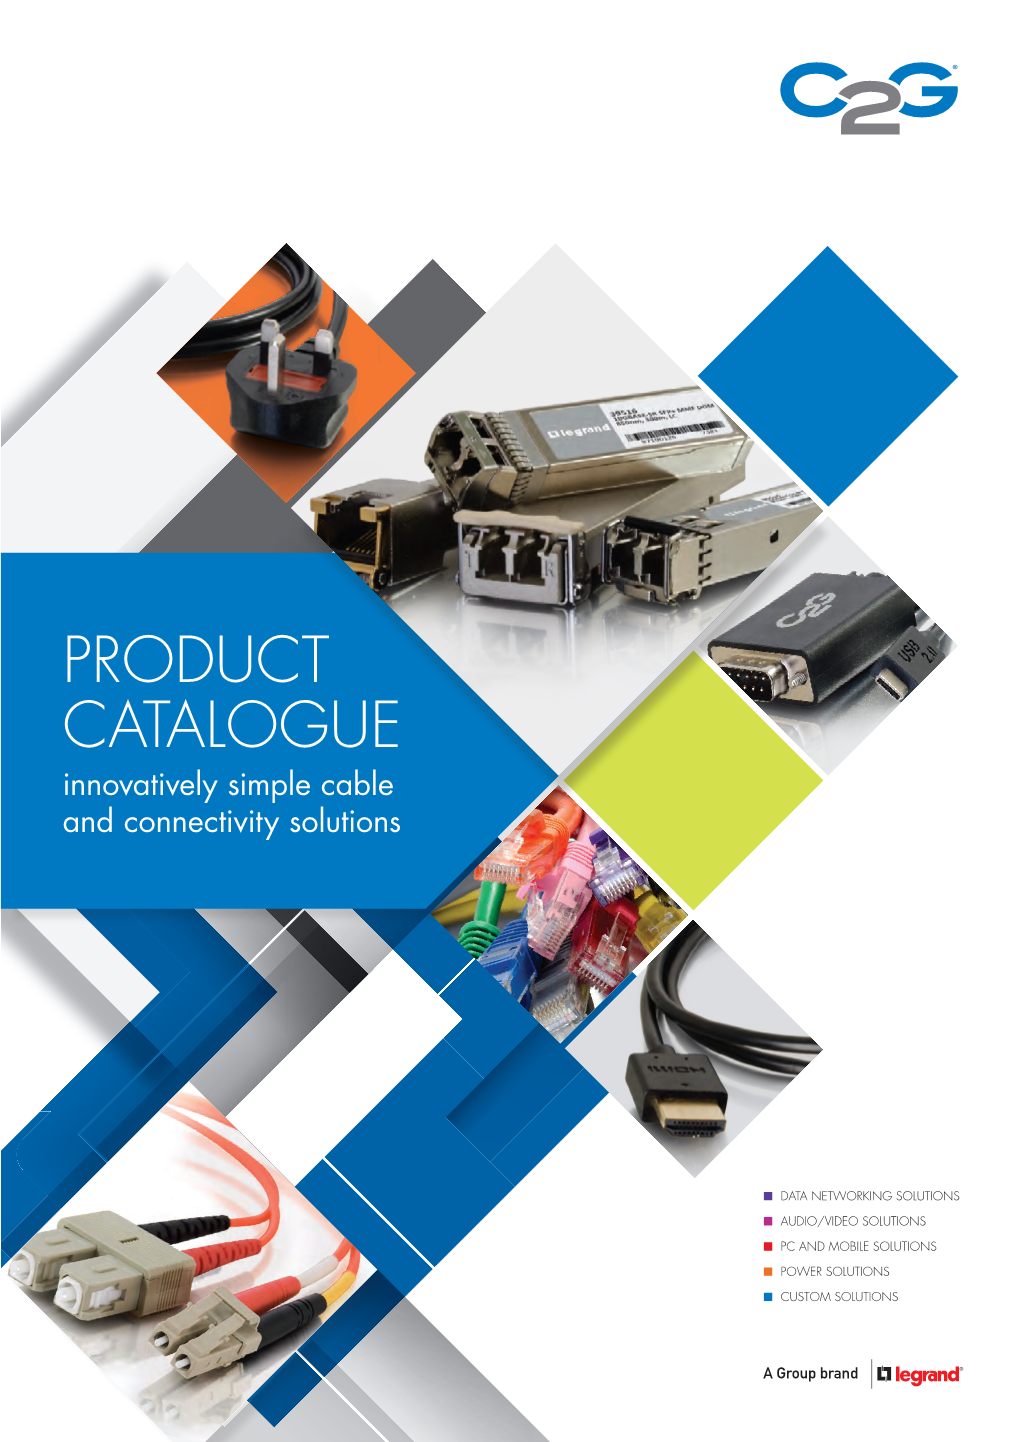 PRODUCT CATALOGUE Innovatively Simple Cable and Connectivity Solutions